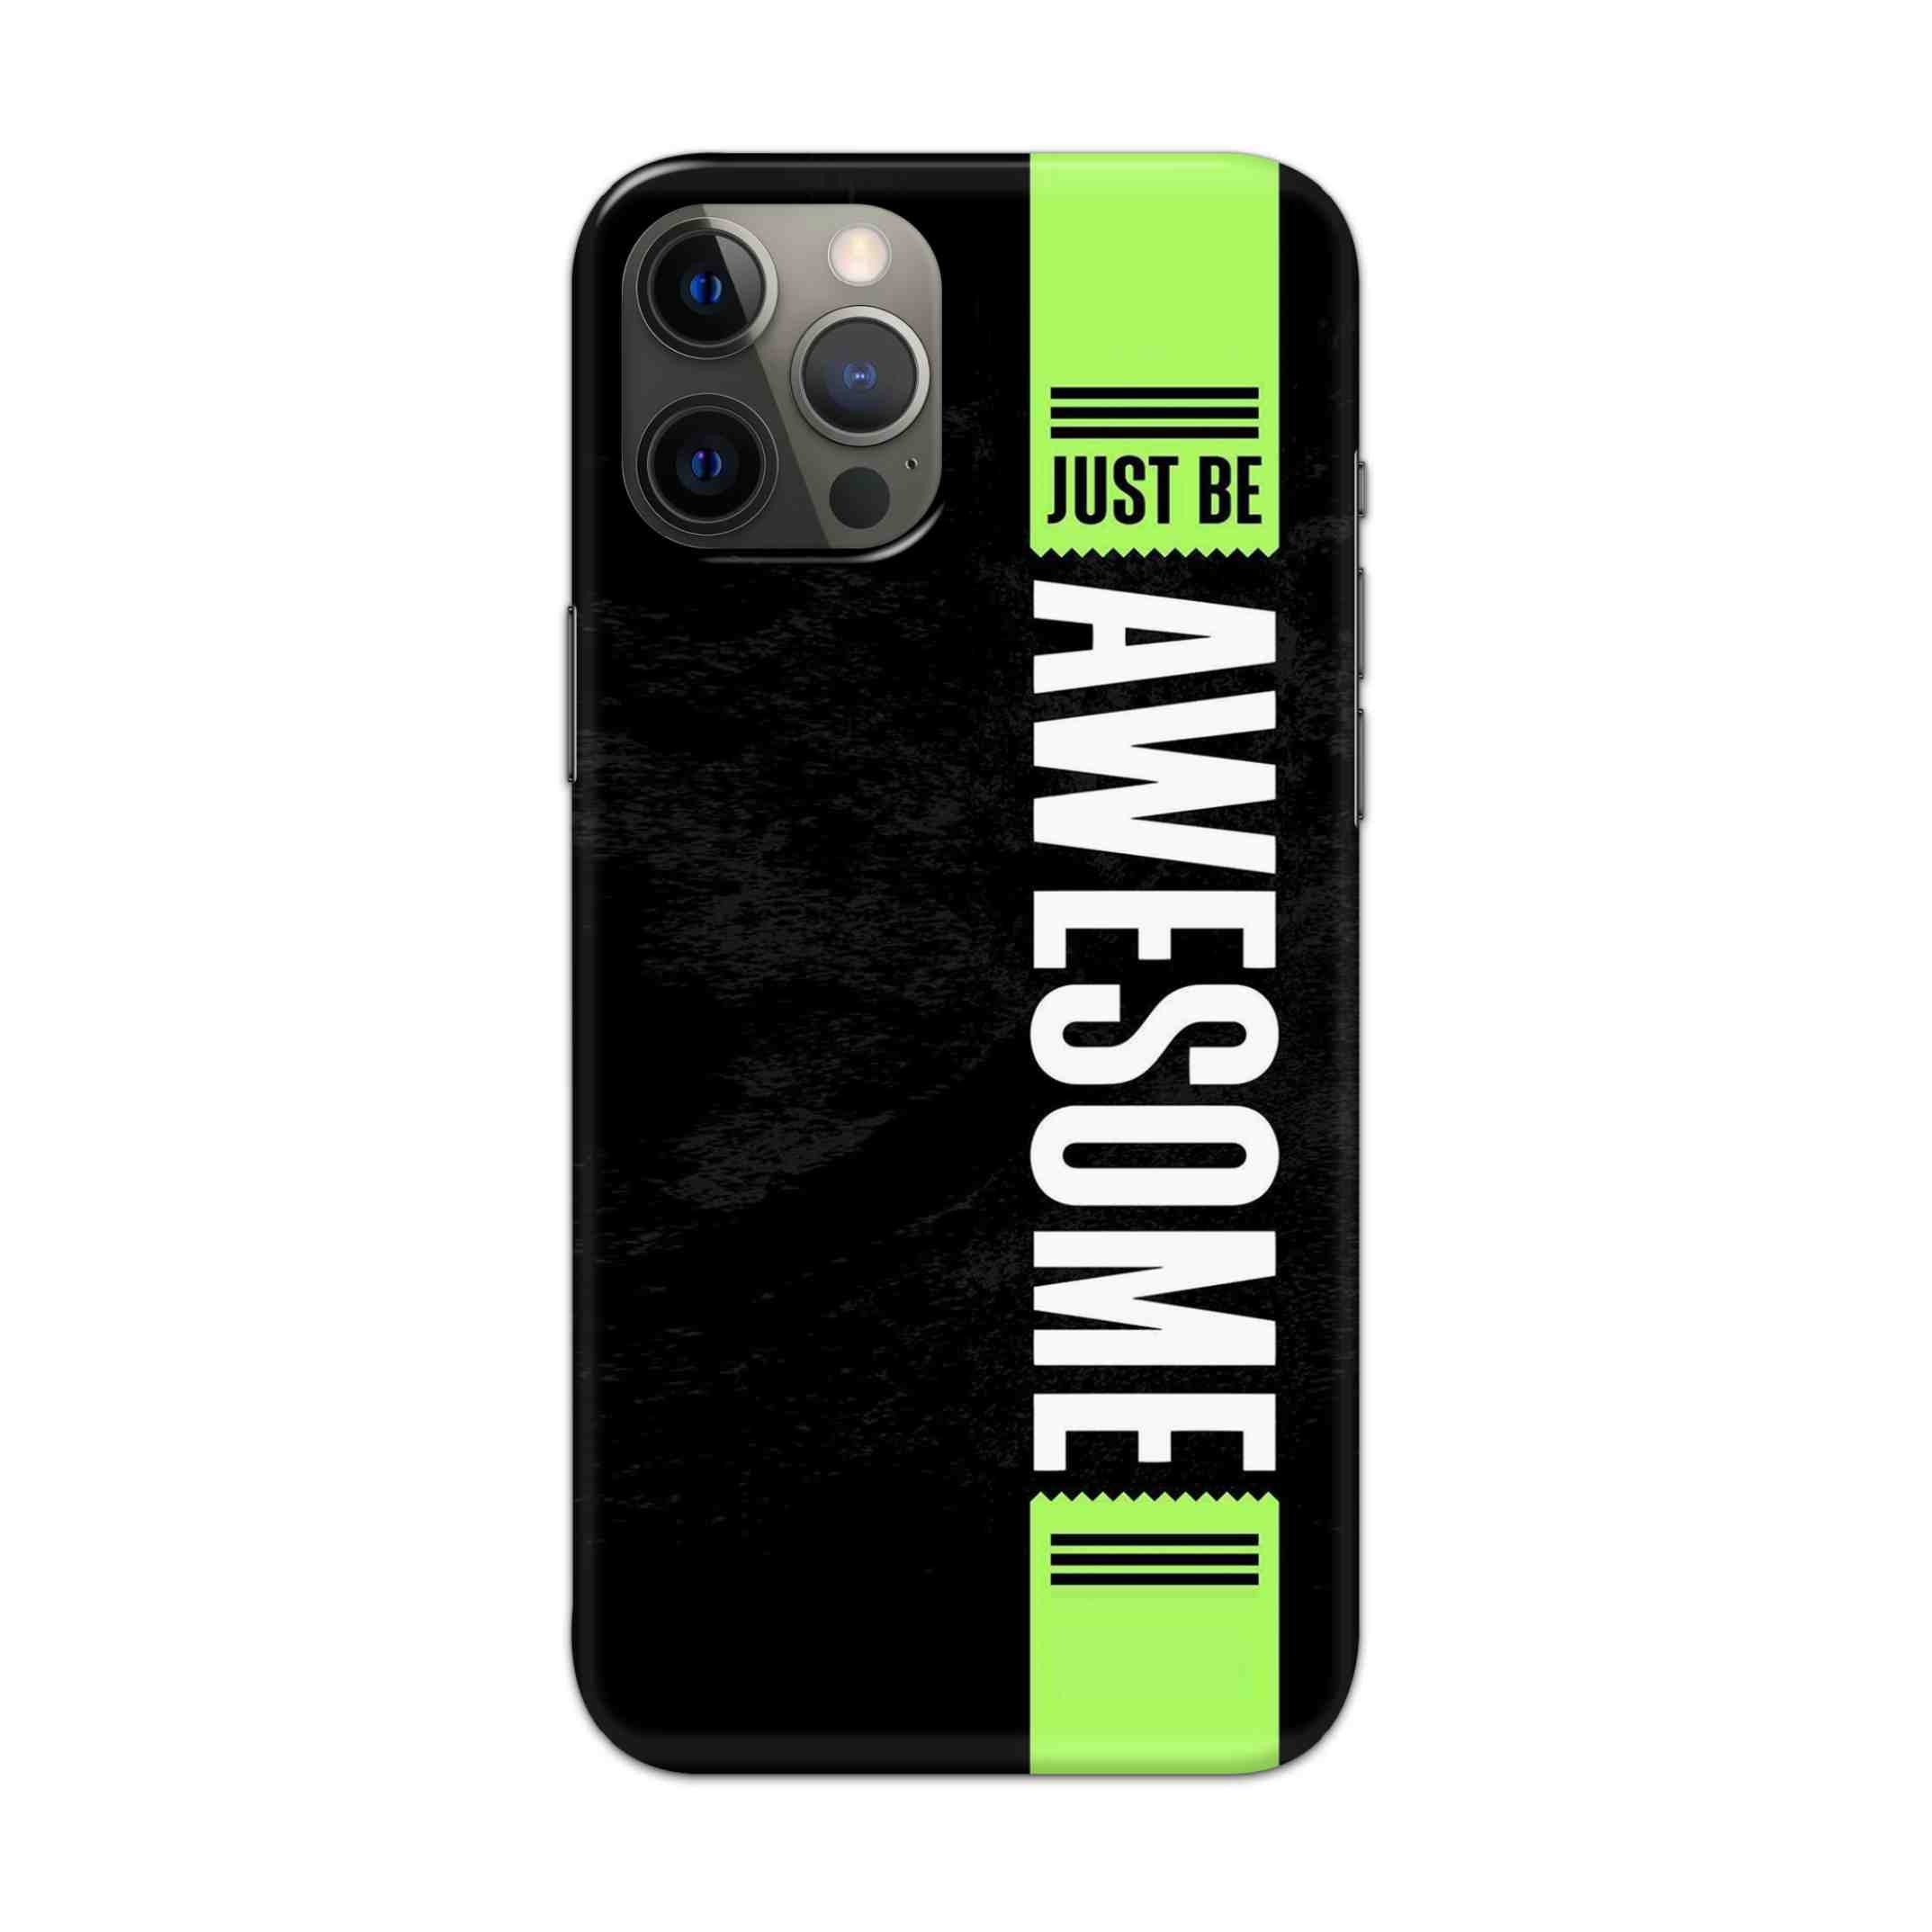 Buy Awesome Street Hard Back Mobile Phone Case/Cover For Apple iPhone 12 pro Online